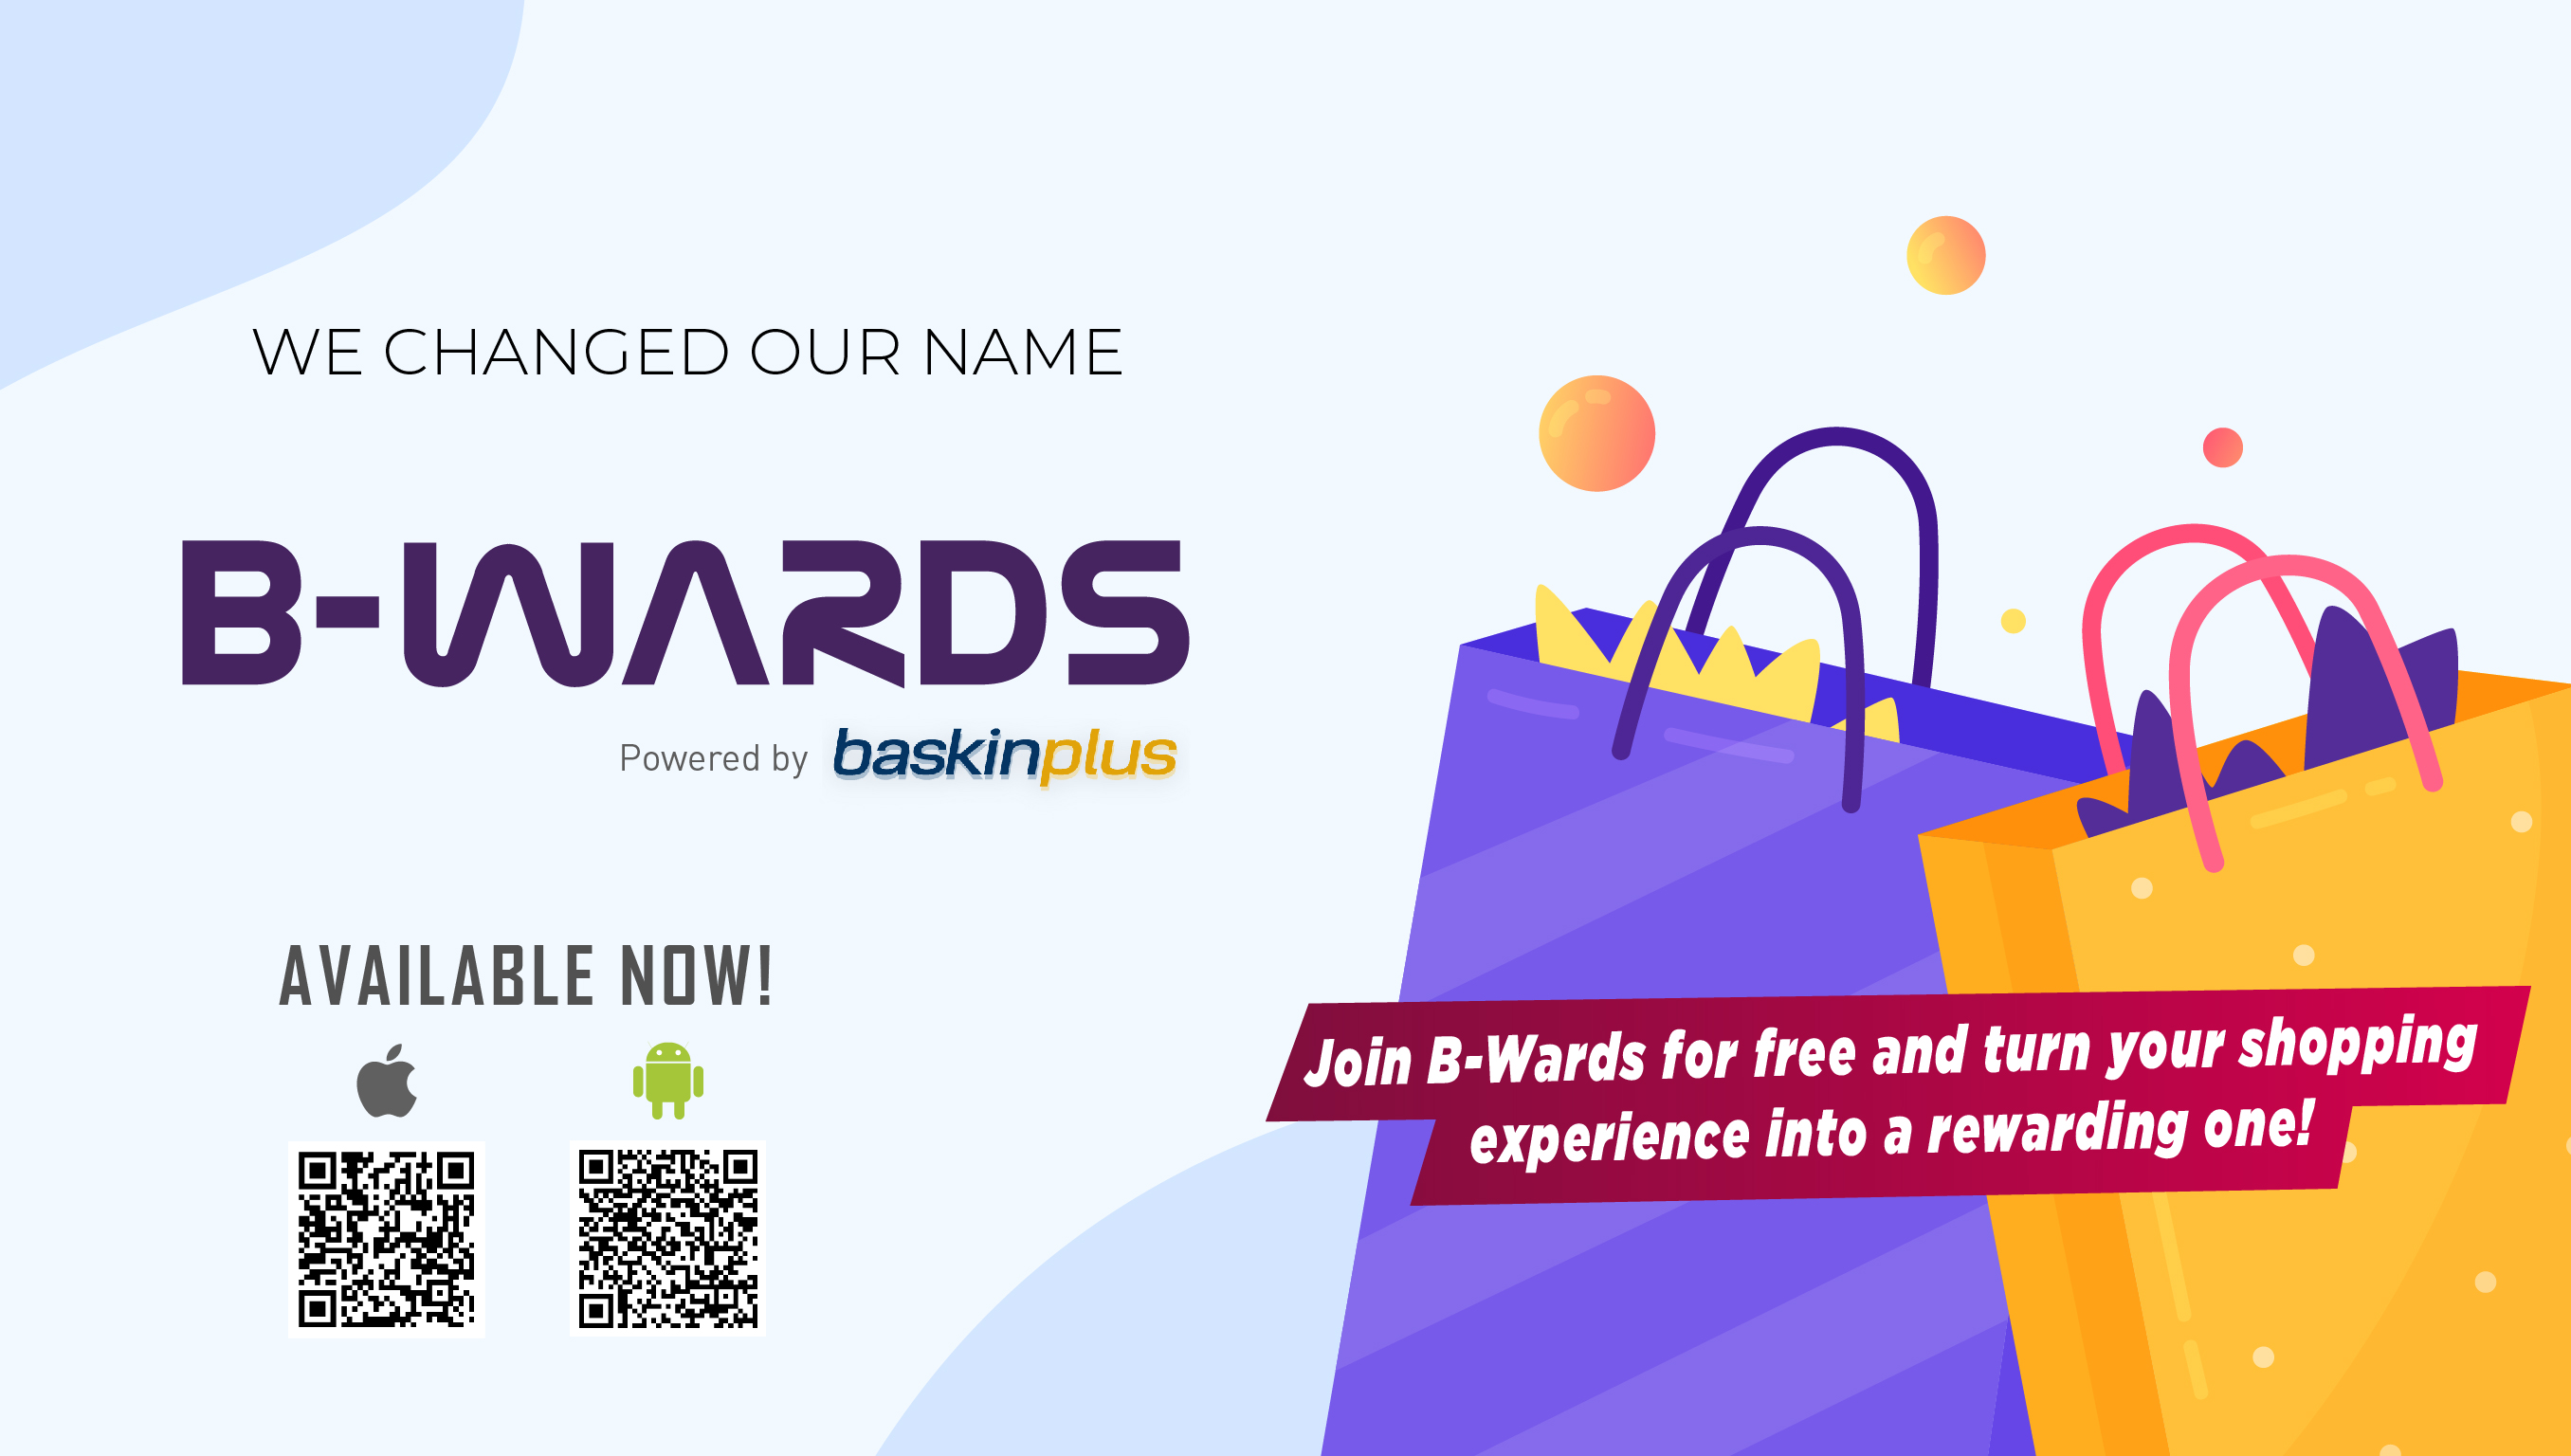 Join B-Wards for free and turn your shopping experience into a rewarding one!